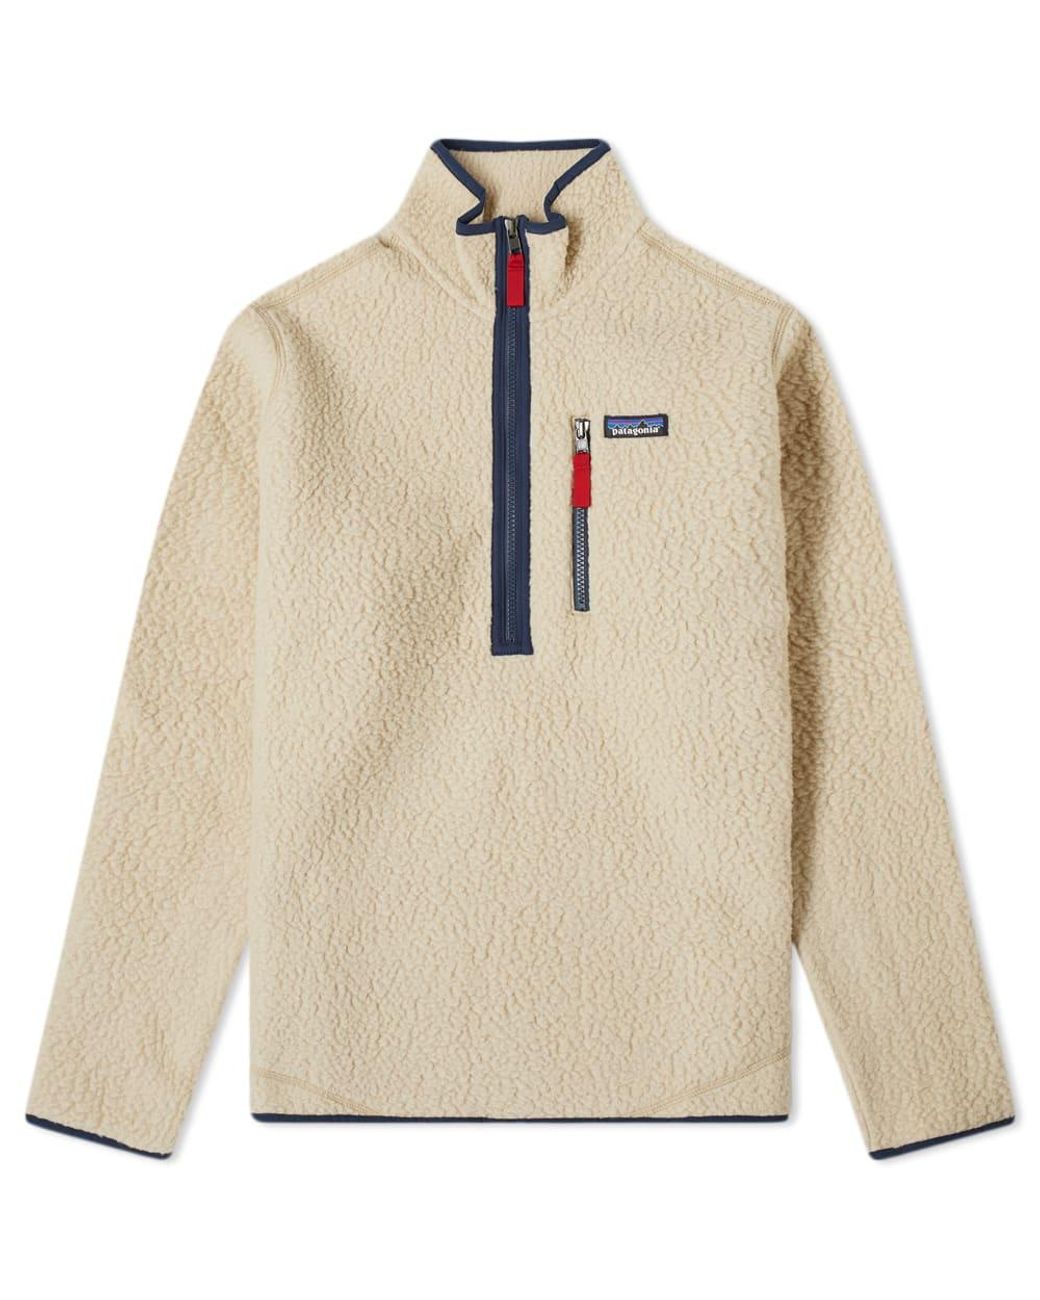 Patagonia Synthetic Retro Pile Sweat in Natural for Men - Lyst